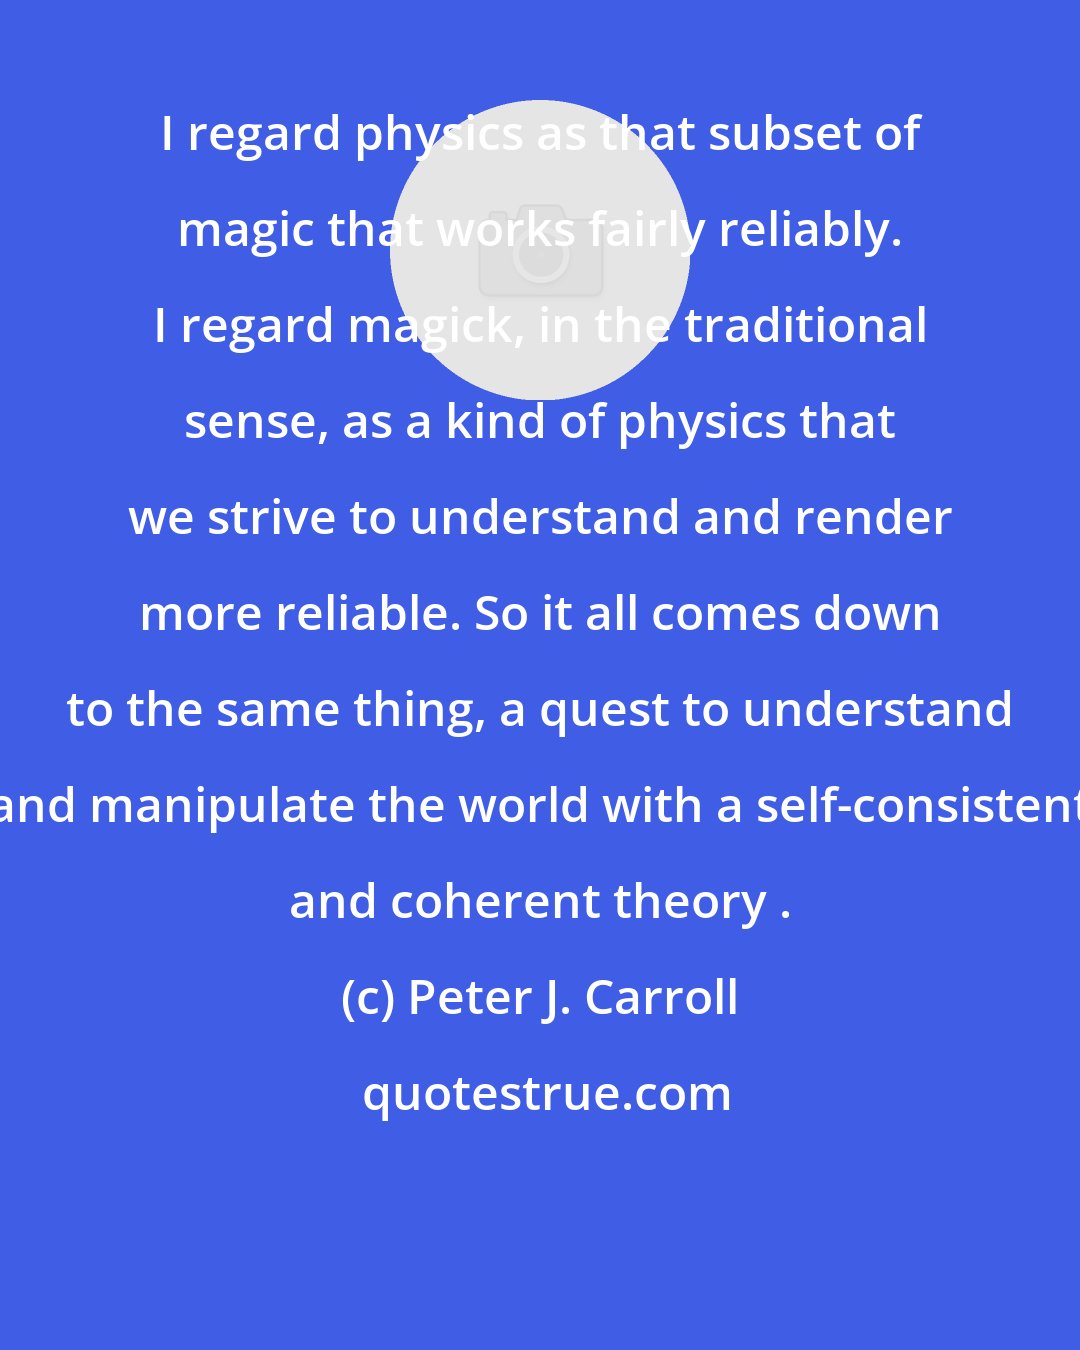 Peter J. Carroll: I regard physics as that subset of magic that works fairly reliably. I regard magick, in the traditional sense, as a kind of physics that we strive to understand and render more reliable. So it all comes down to the same thing, a quest to understand and manipulate the world with a self-consistent and coherent theory .